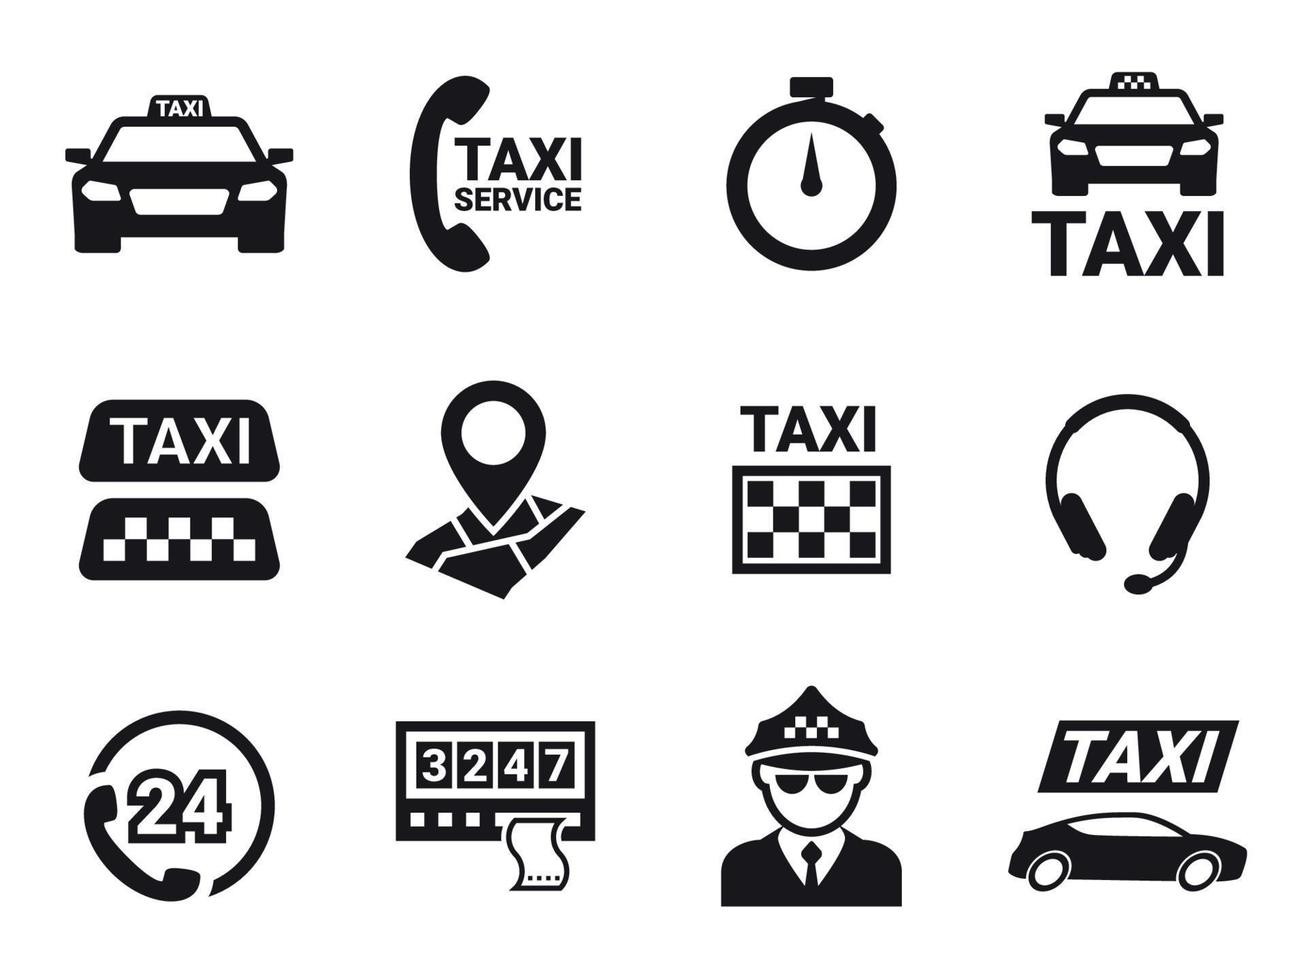 Taxi icons set. Black on a white background vector